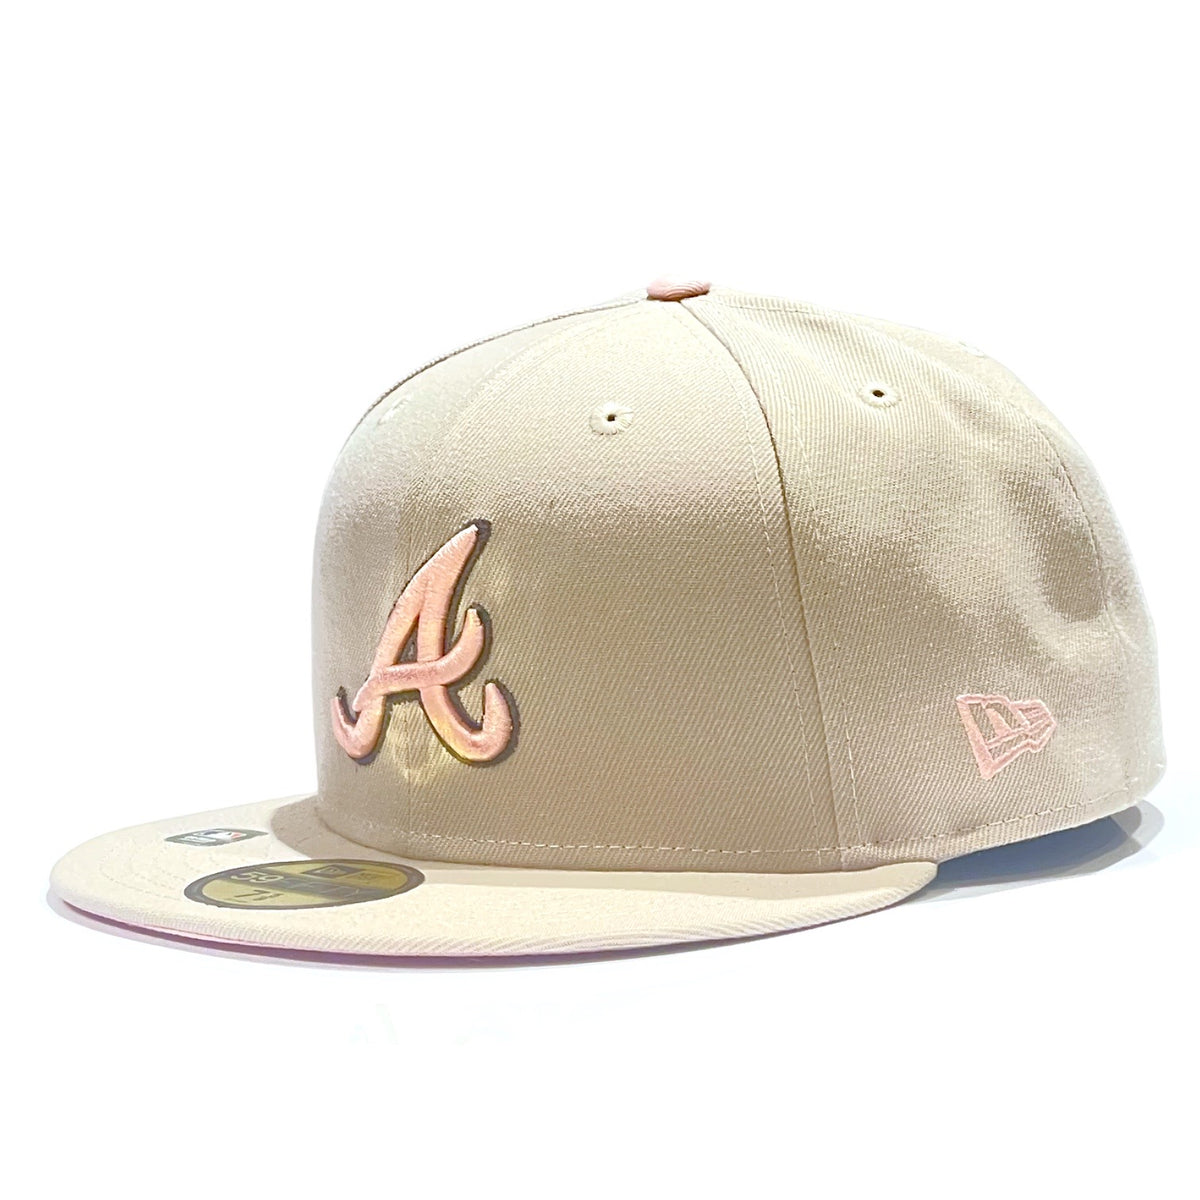 Atlanta Braves New Era Mother's Day On-Field 59FIFTY Fitted Hat - Navy/Pink